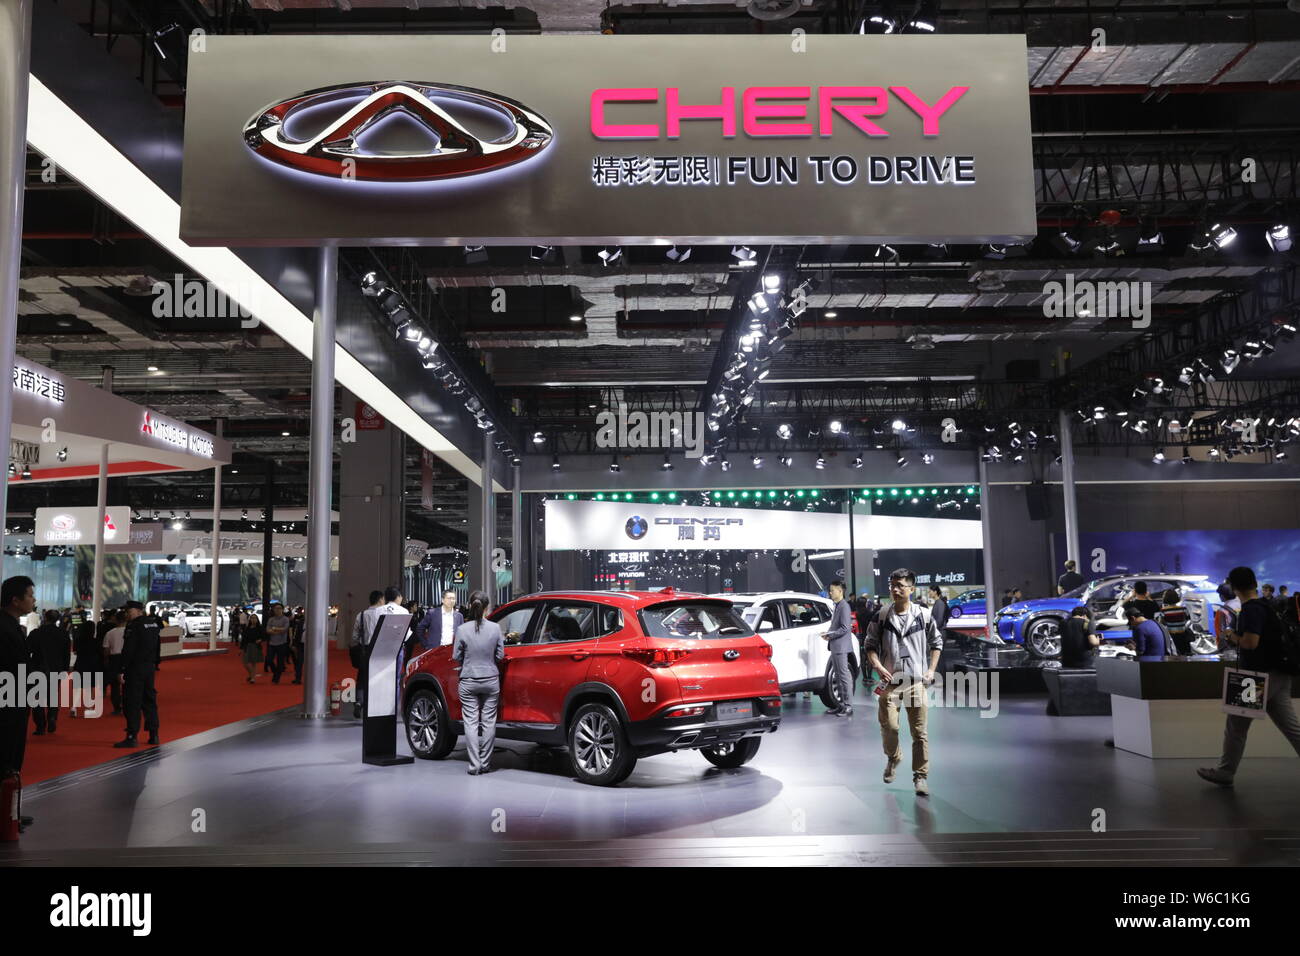 https://c8.alamy.com/comp/W6C1KG/file-people-visit-the-stand-of-chery-auto-during-the-17th-shanghai-international-automobile-industry-exhibition-also-known-as-auto-shanghai-2017-W6C1KG.jpg